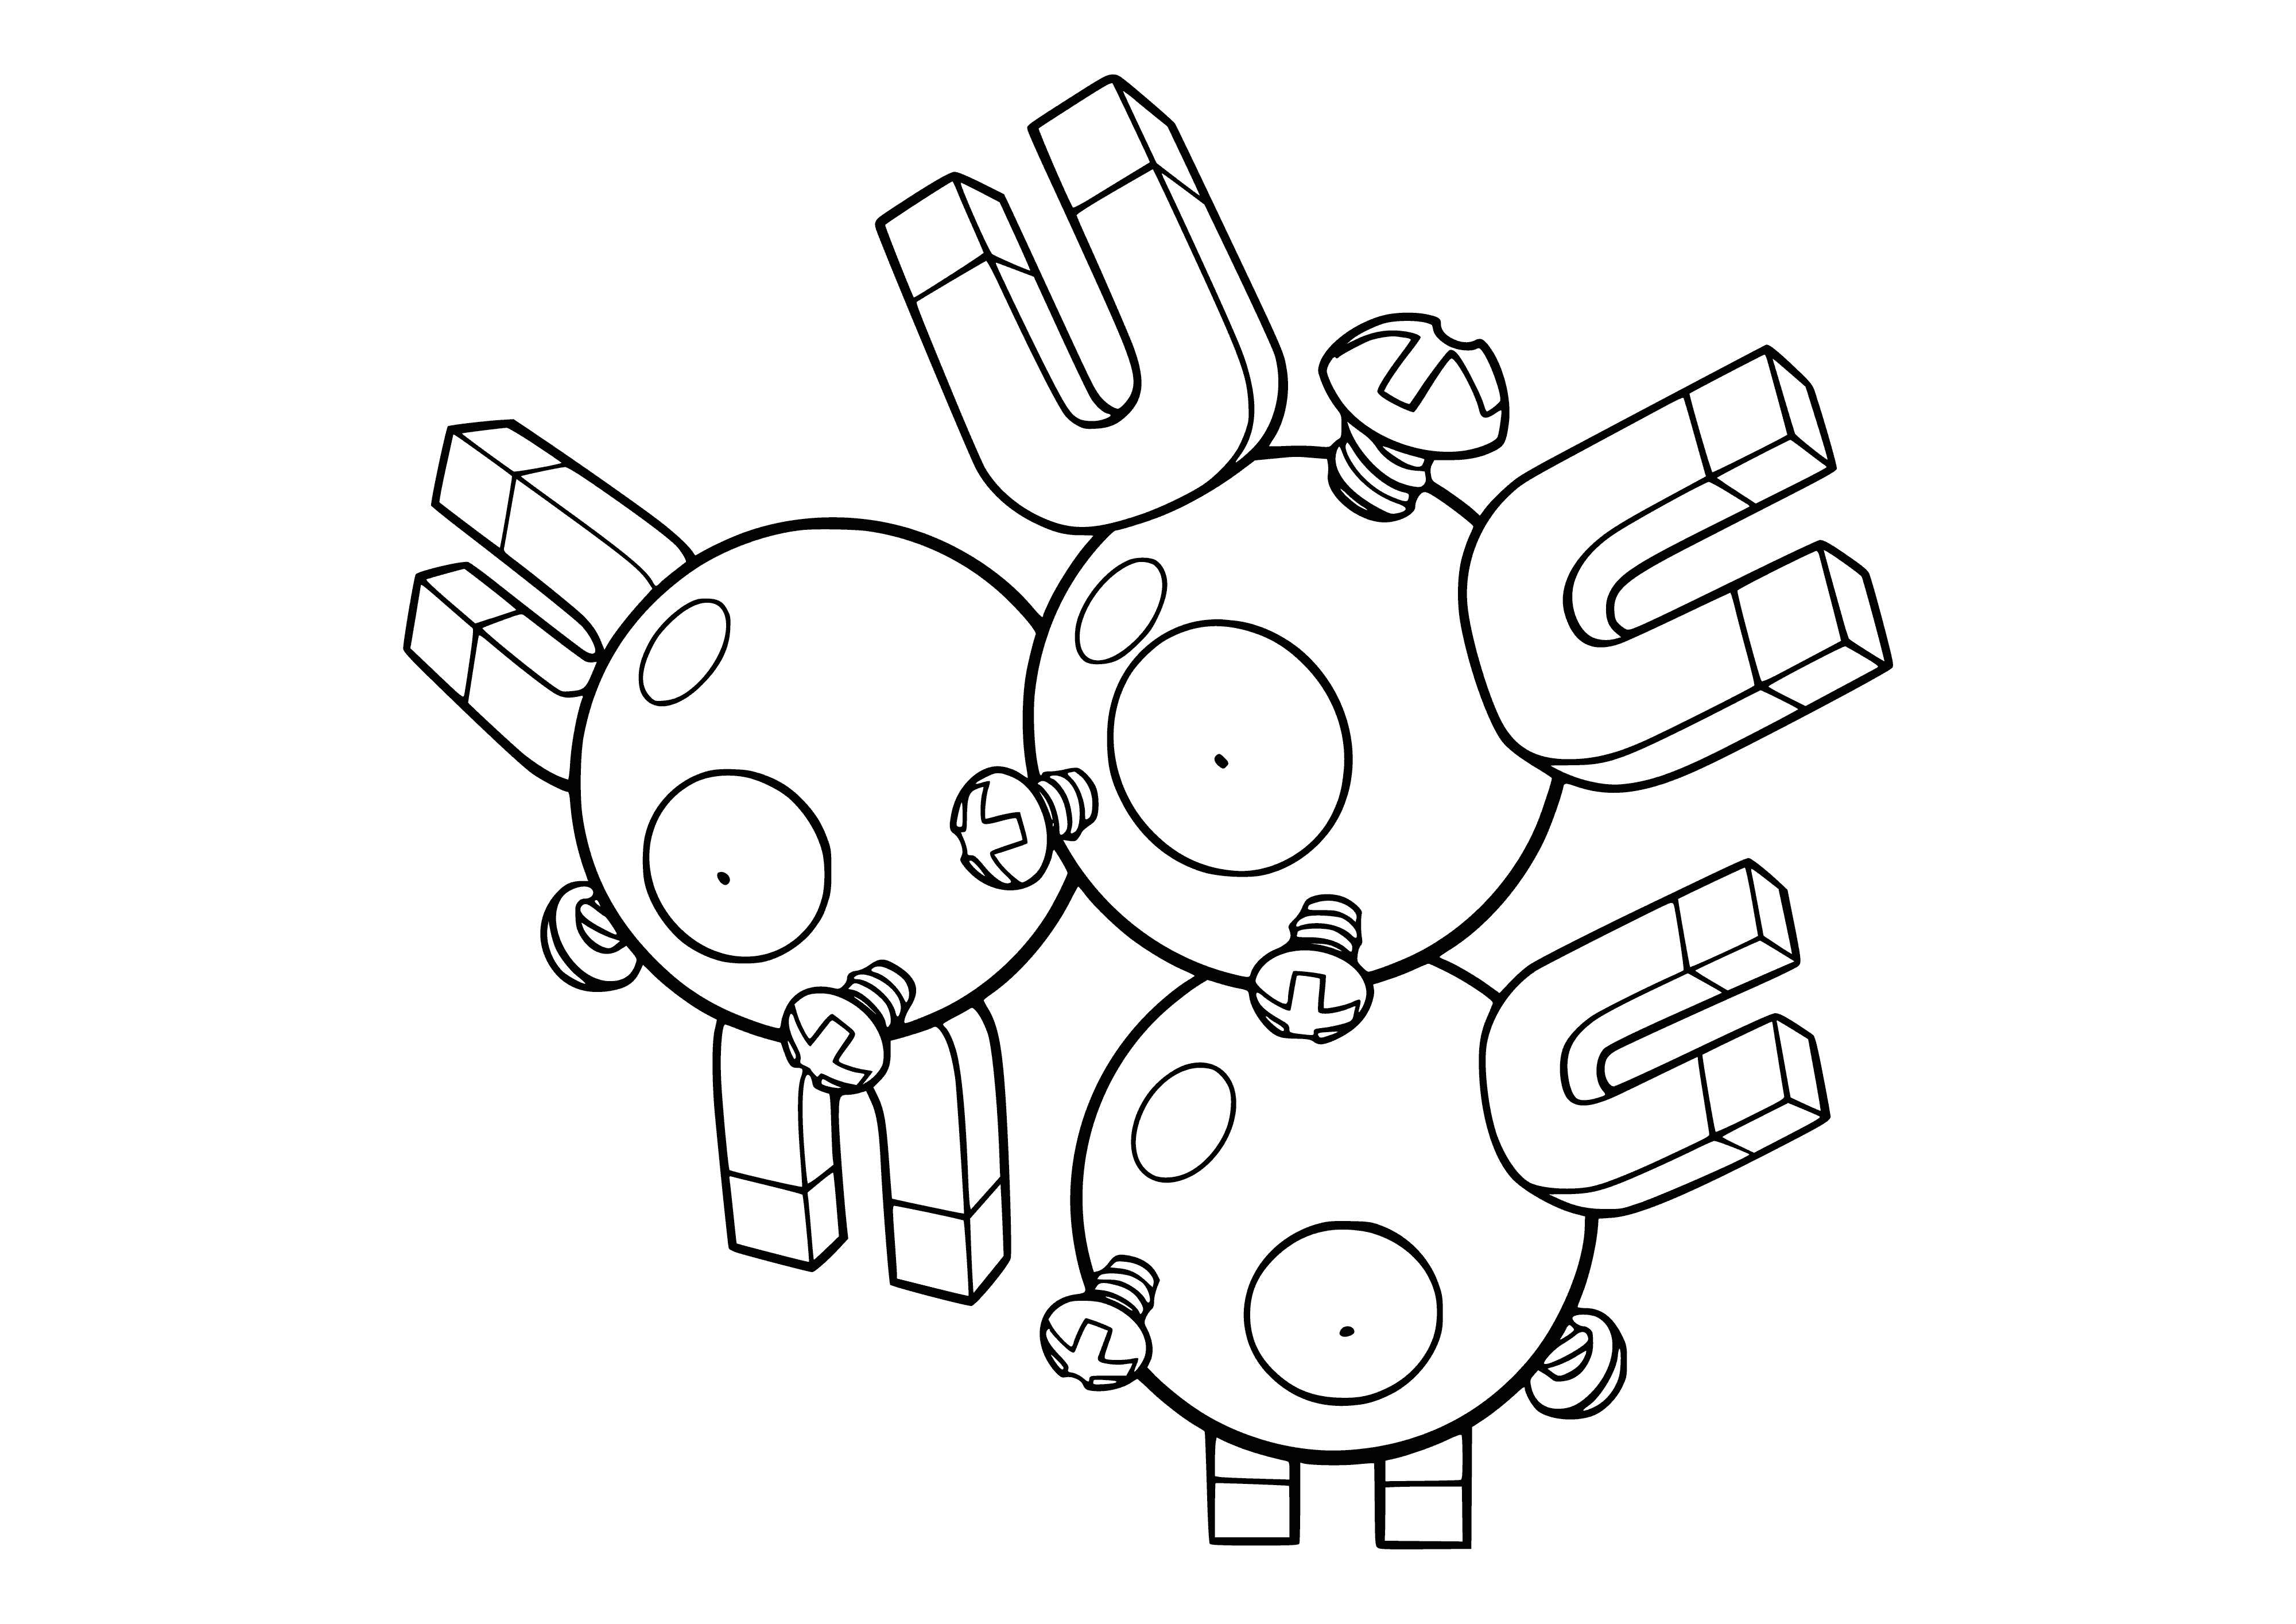 coloring page: Magneton is a spherical robotic Pokémon formed by three Magnemite linked by a strong electromagnetic field. It can fly & generate powerful electric fields.